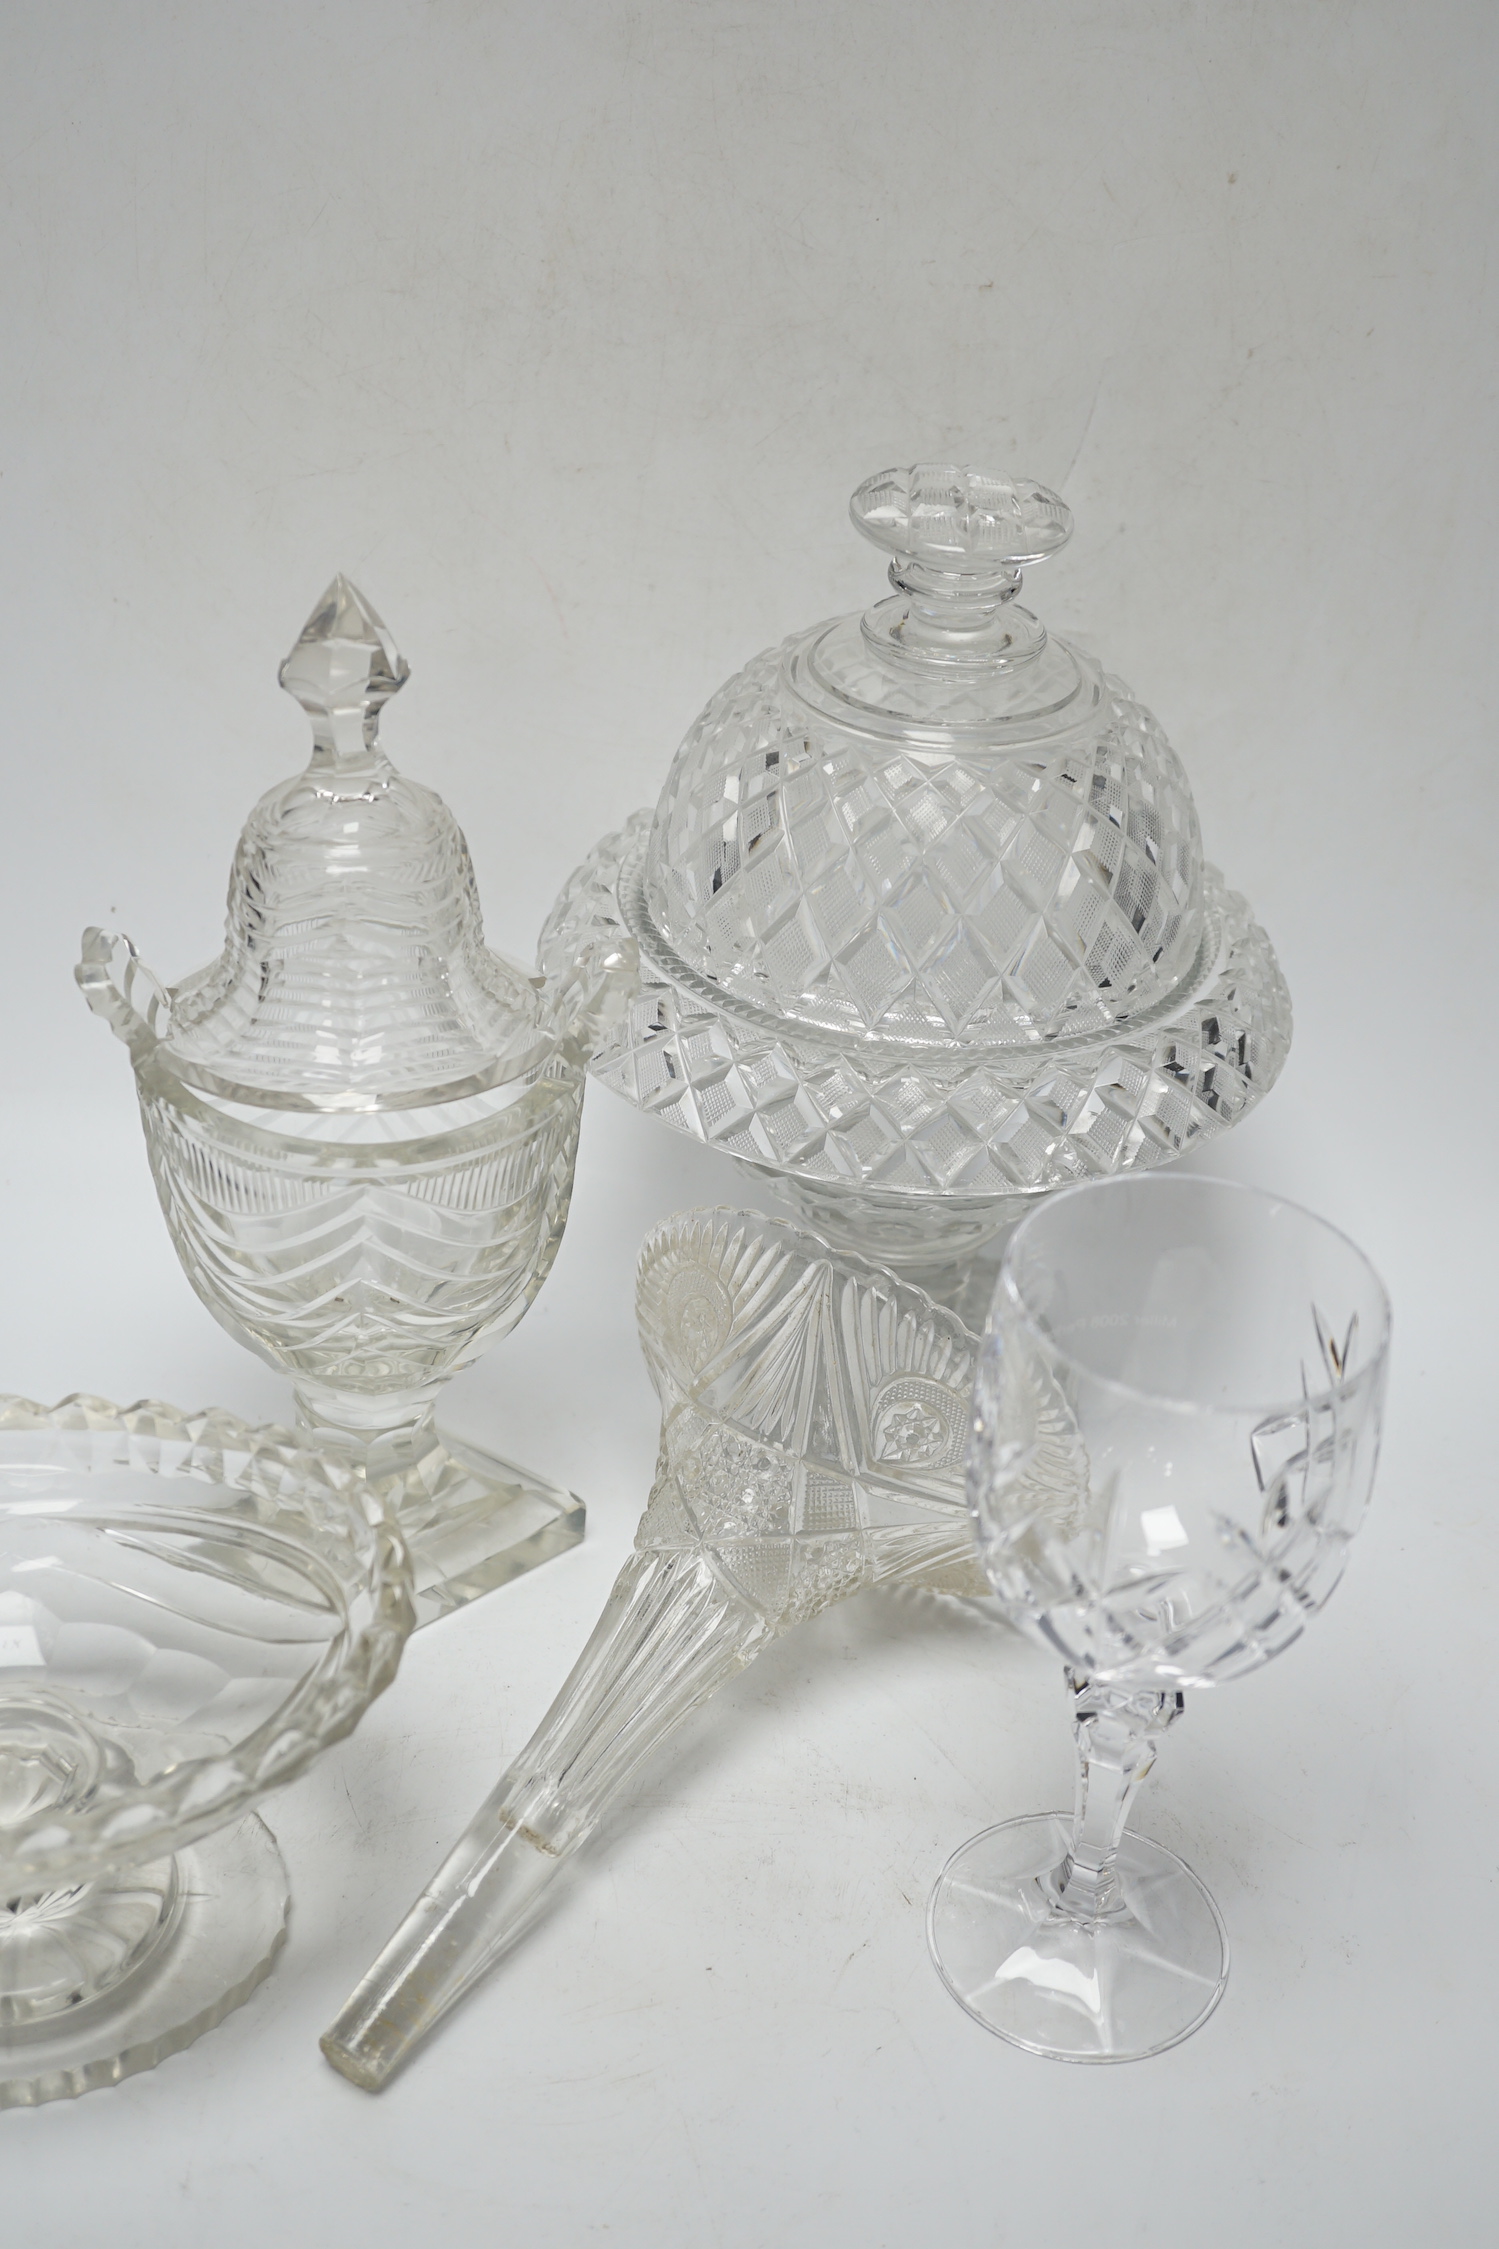 Ten cut glass items including; four pedestal bowls and covers, two oval, pedestal dishes, a two oval, pedestal dishes, a jug, a pair of glasses, etc., tallest, 26cm